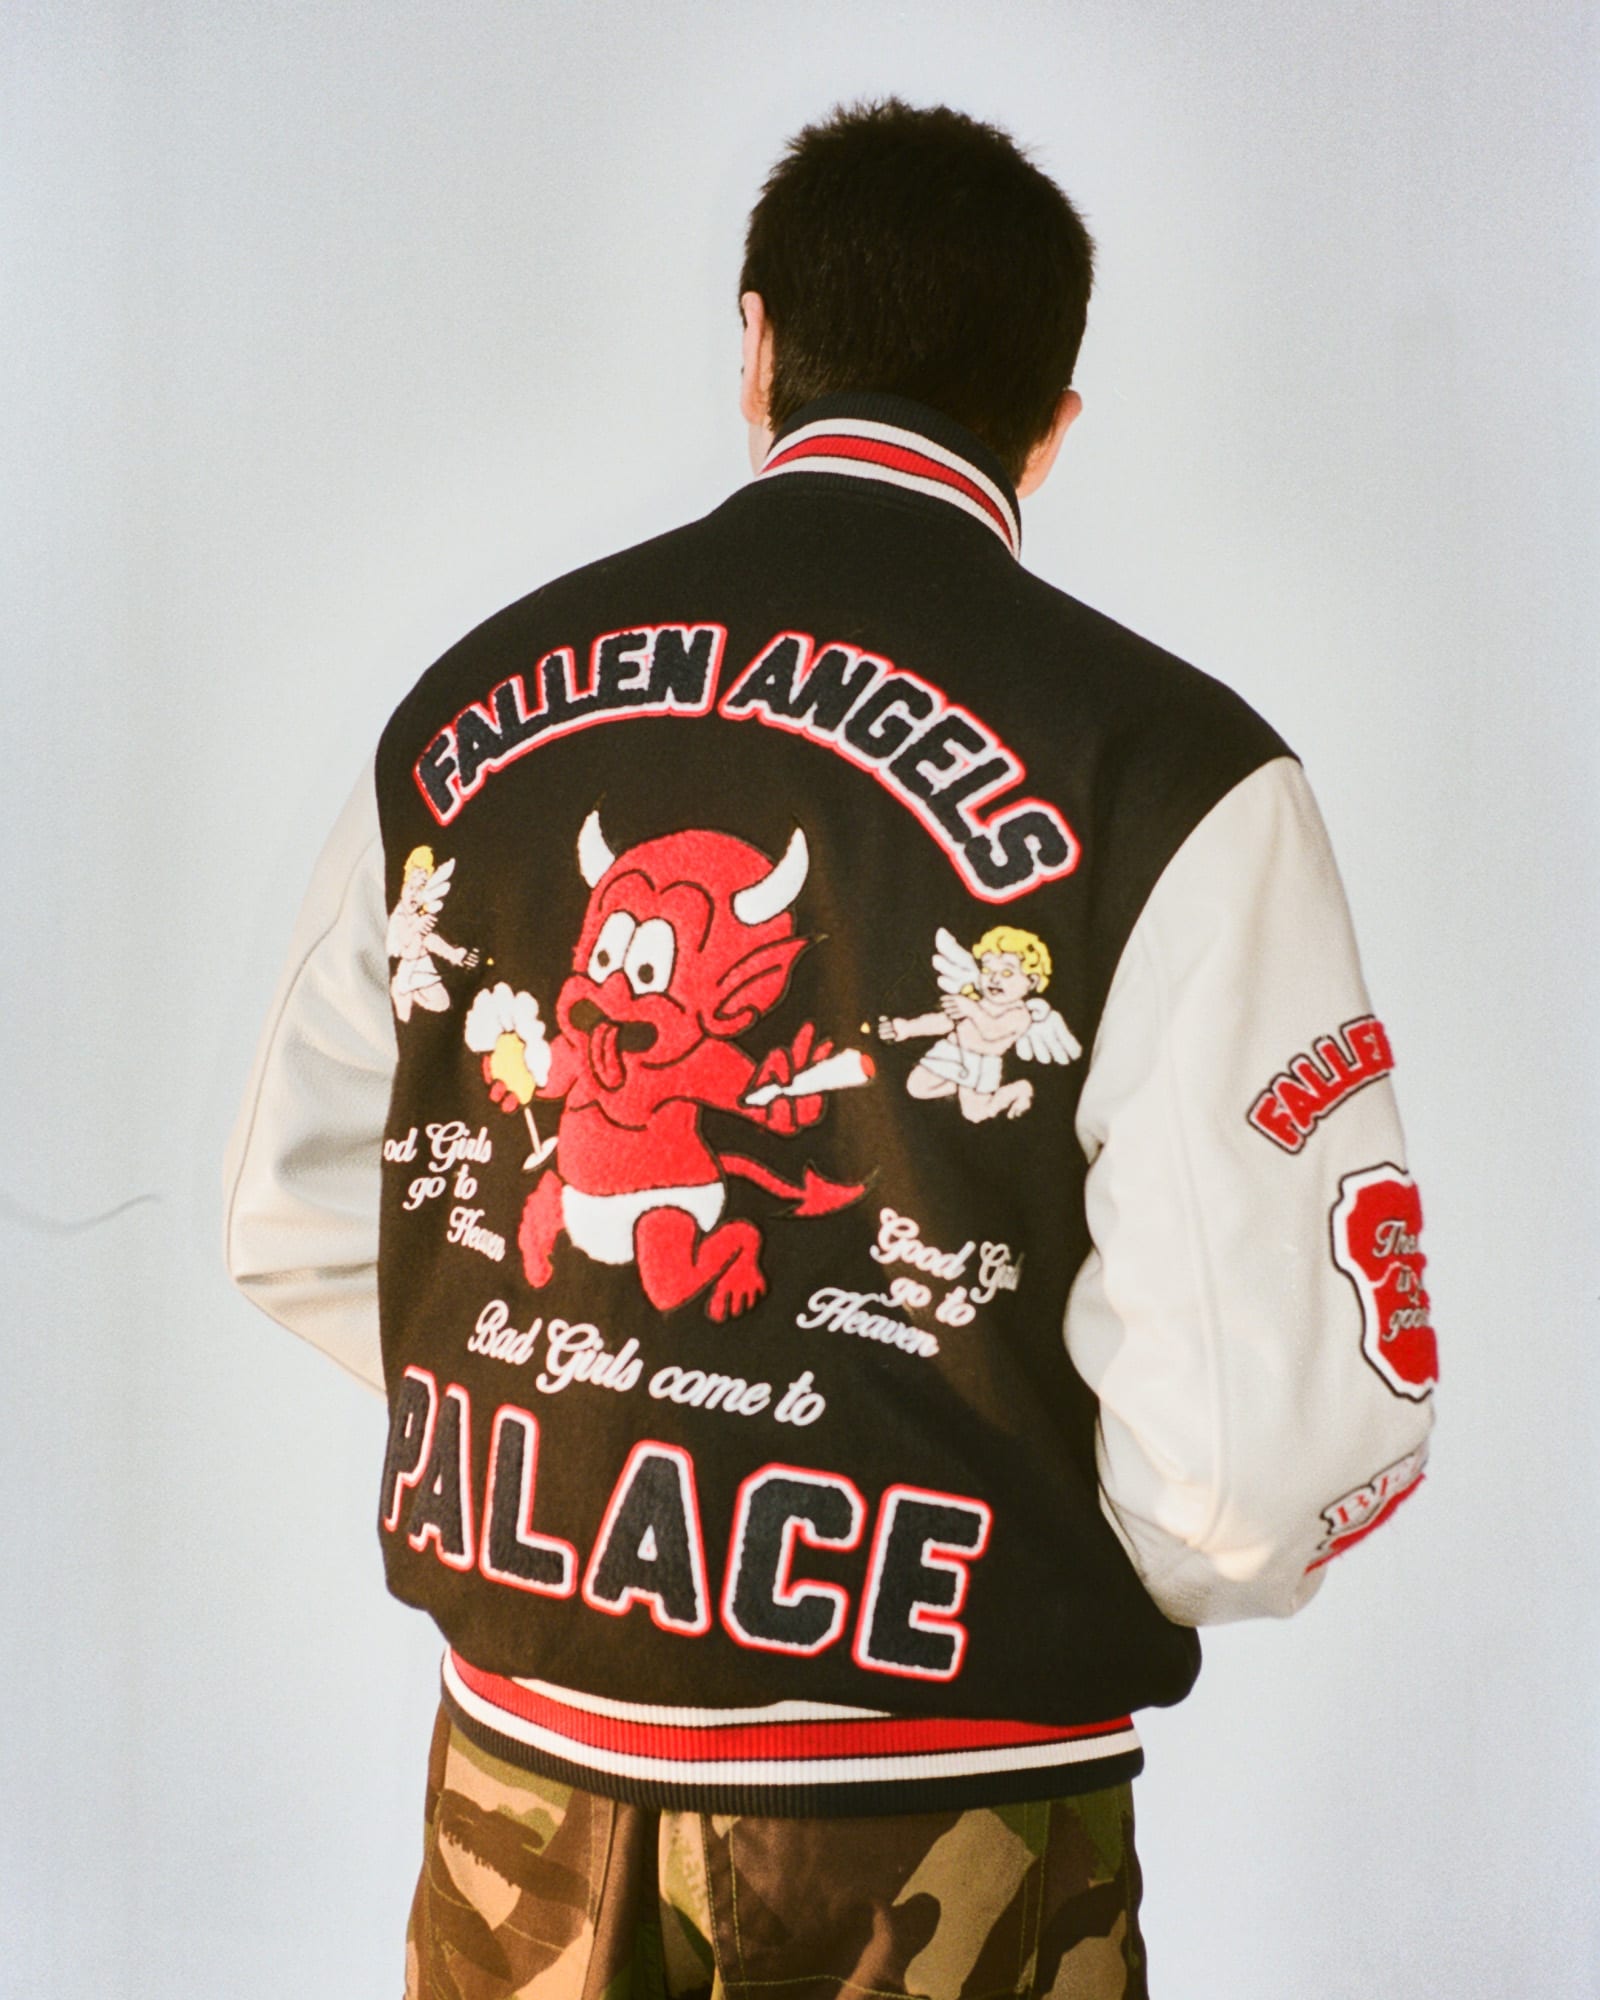 Palace lookbook photo is pictured